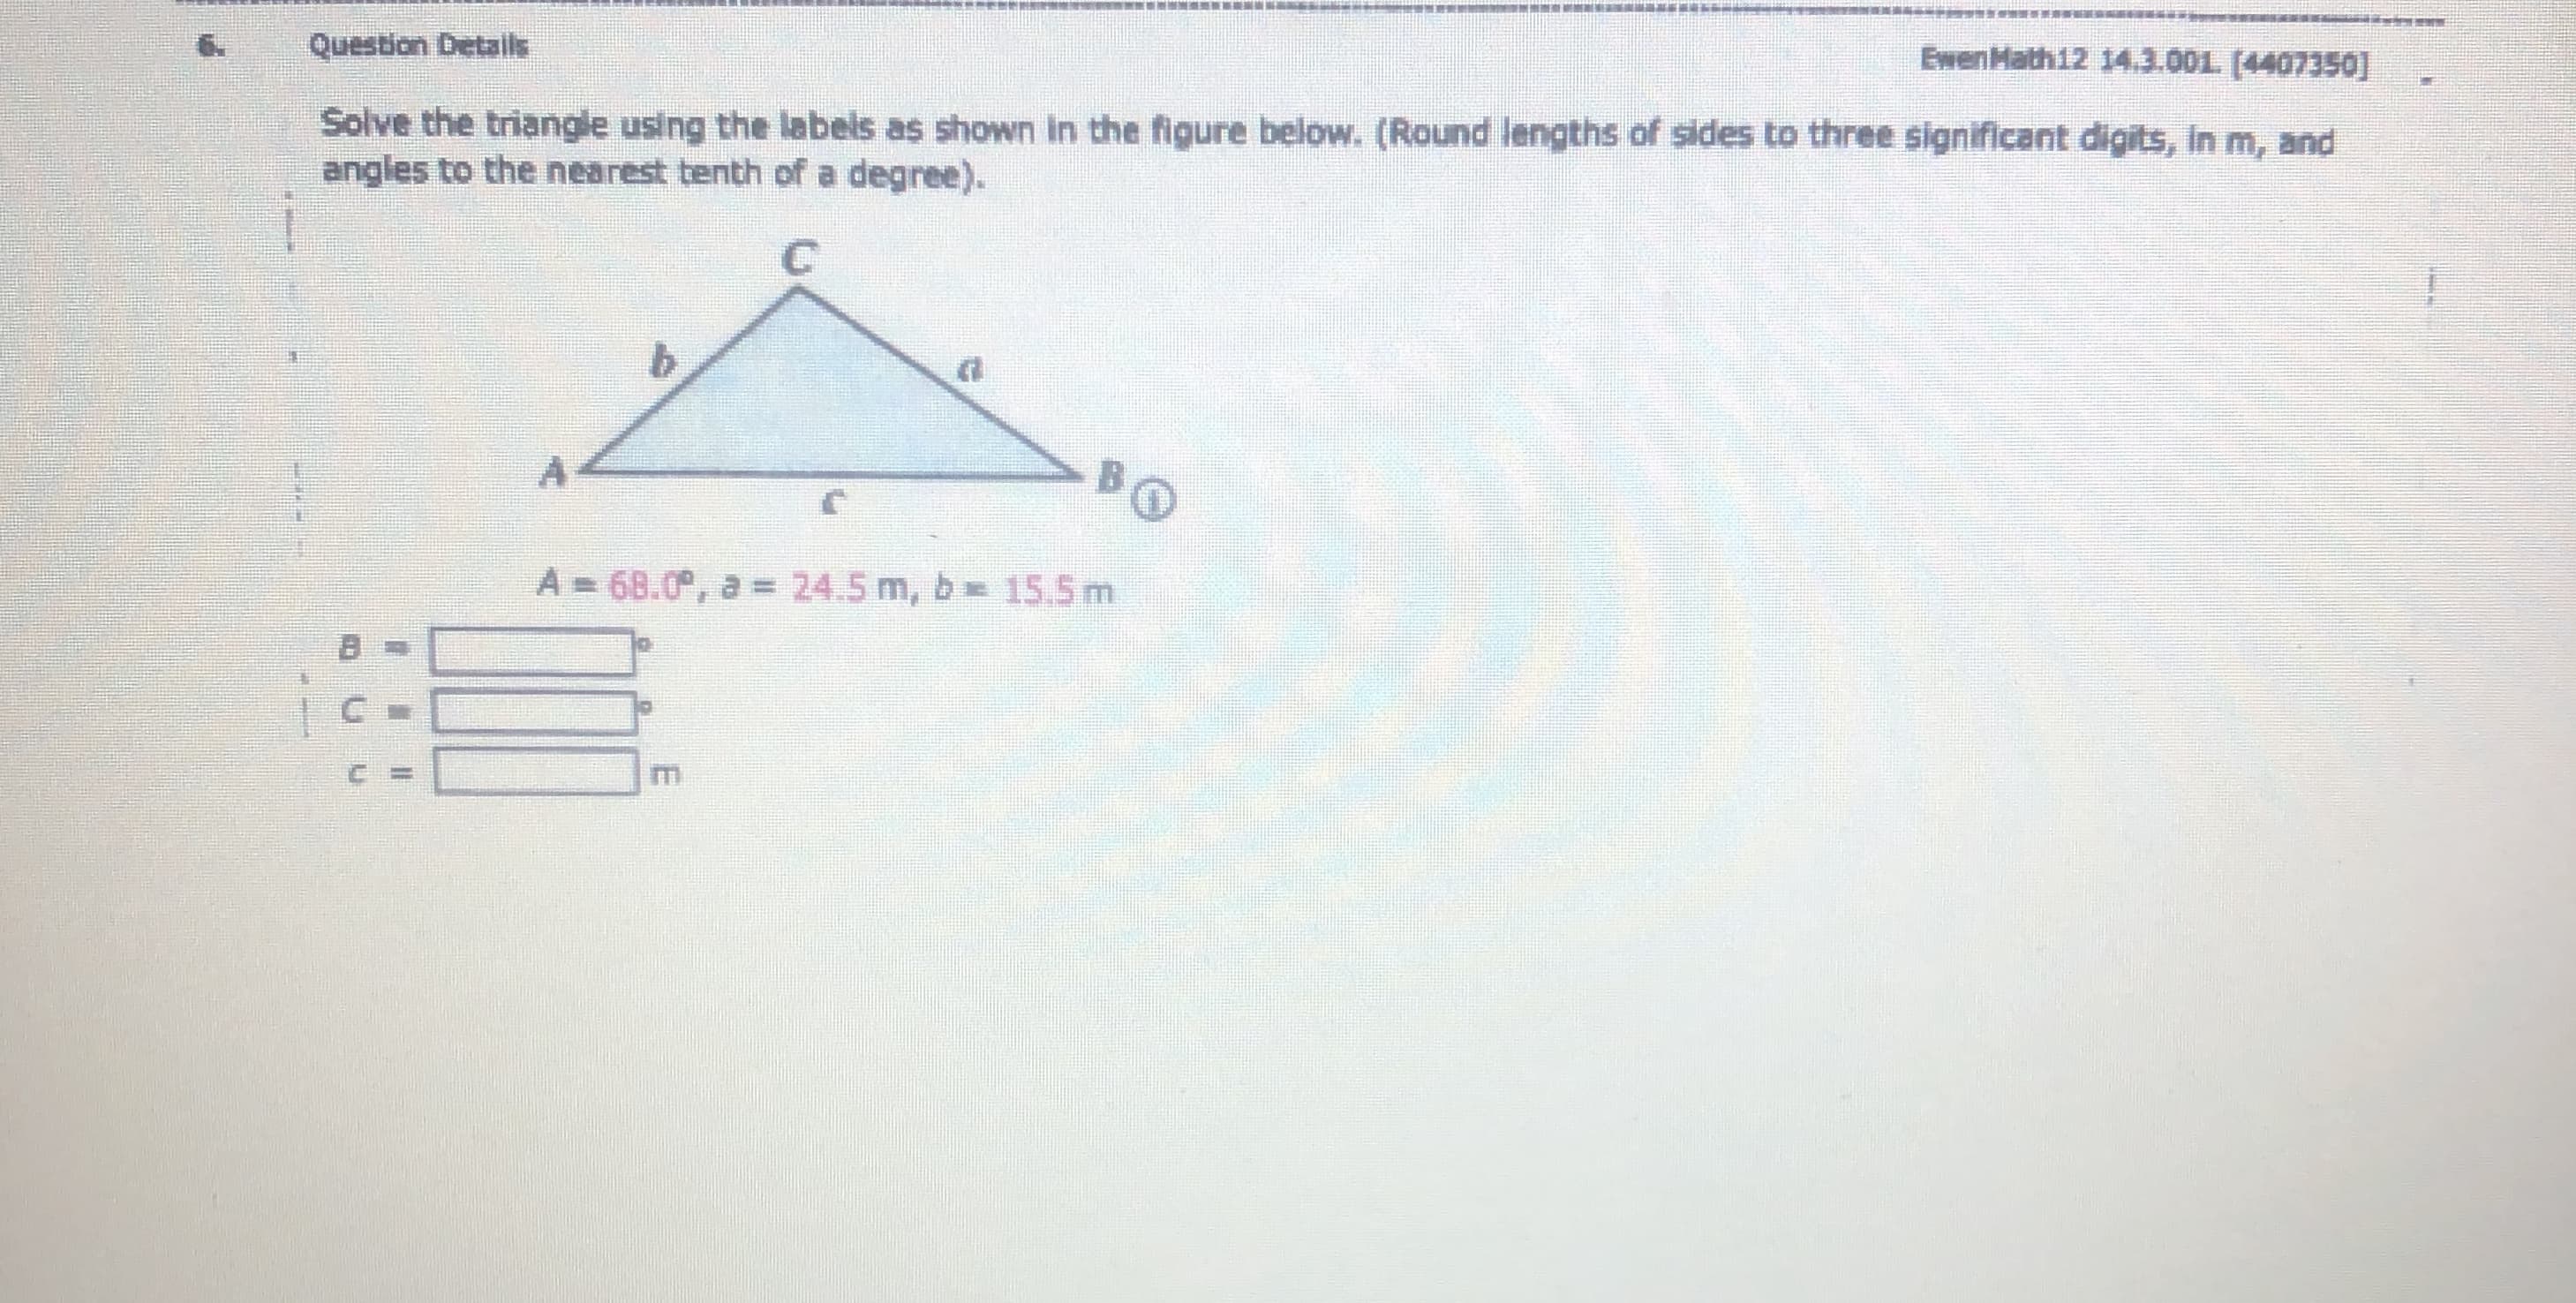 Question Details
EwenMath12 14.3.001. (4407350]
Solve the triangle using the labels as shown in the figure below. (Round lengths of sides to three significant digits, in m, and
angles to the nearest tenth of a degree).
A = 68.0, a = 24.5 m, b 15.5 m
